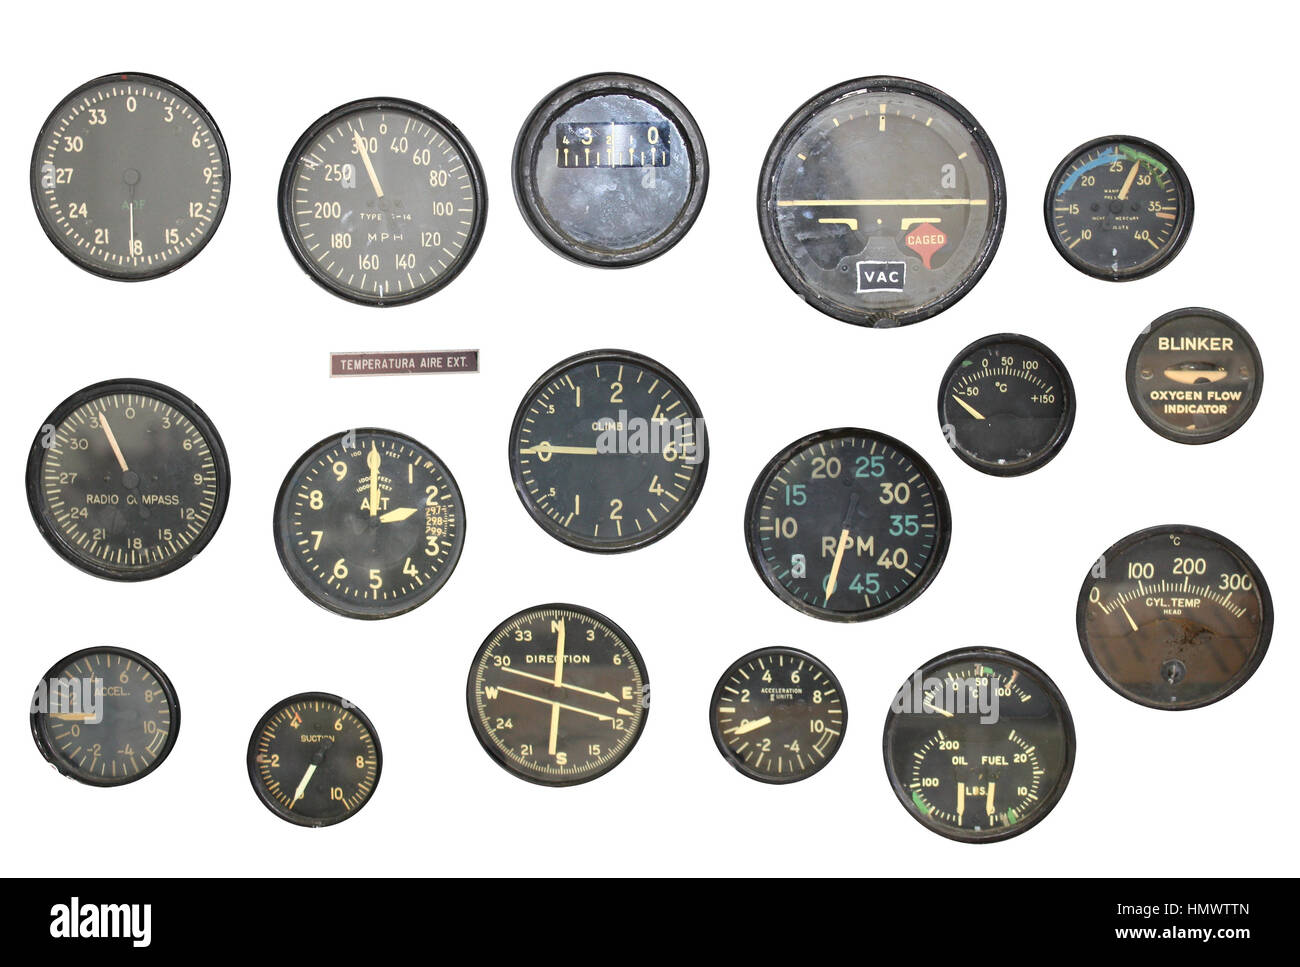 Retro indicators on control panel in a war plane cockpit. Objects isolated on white background Stock Photo